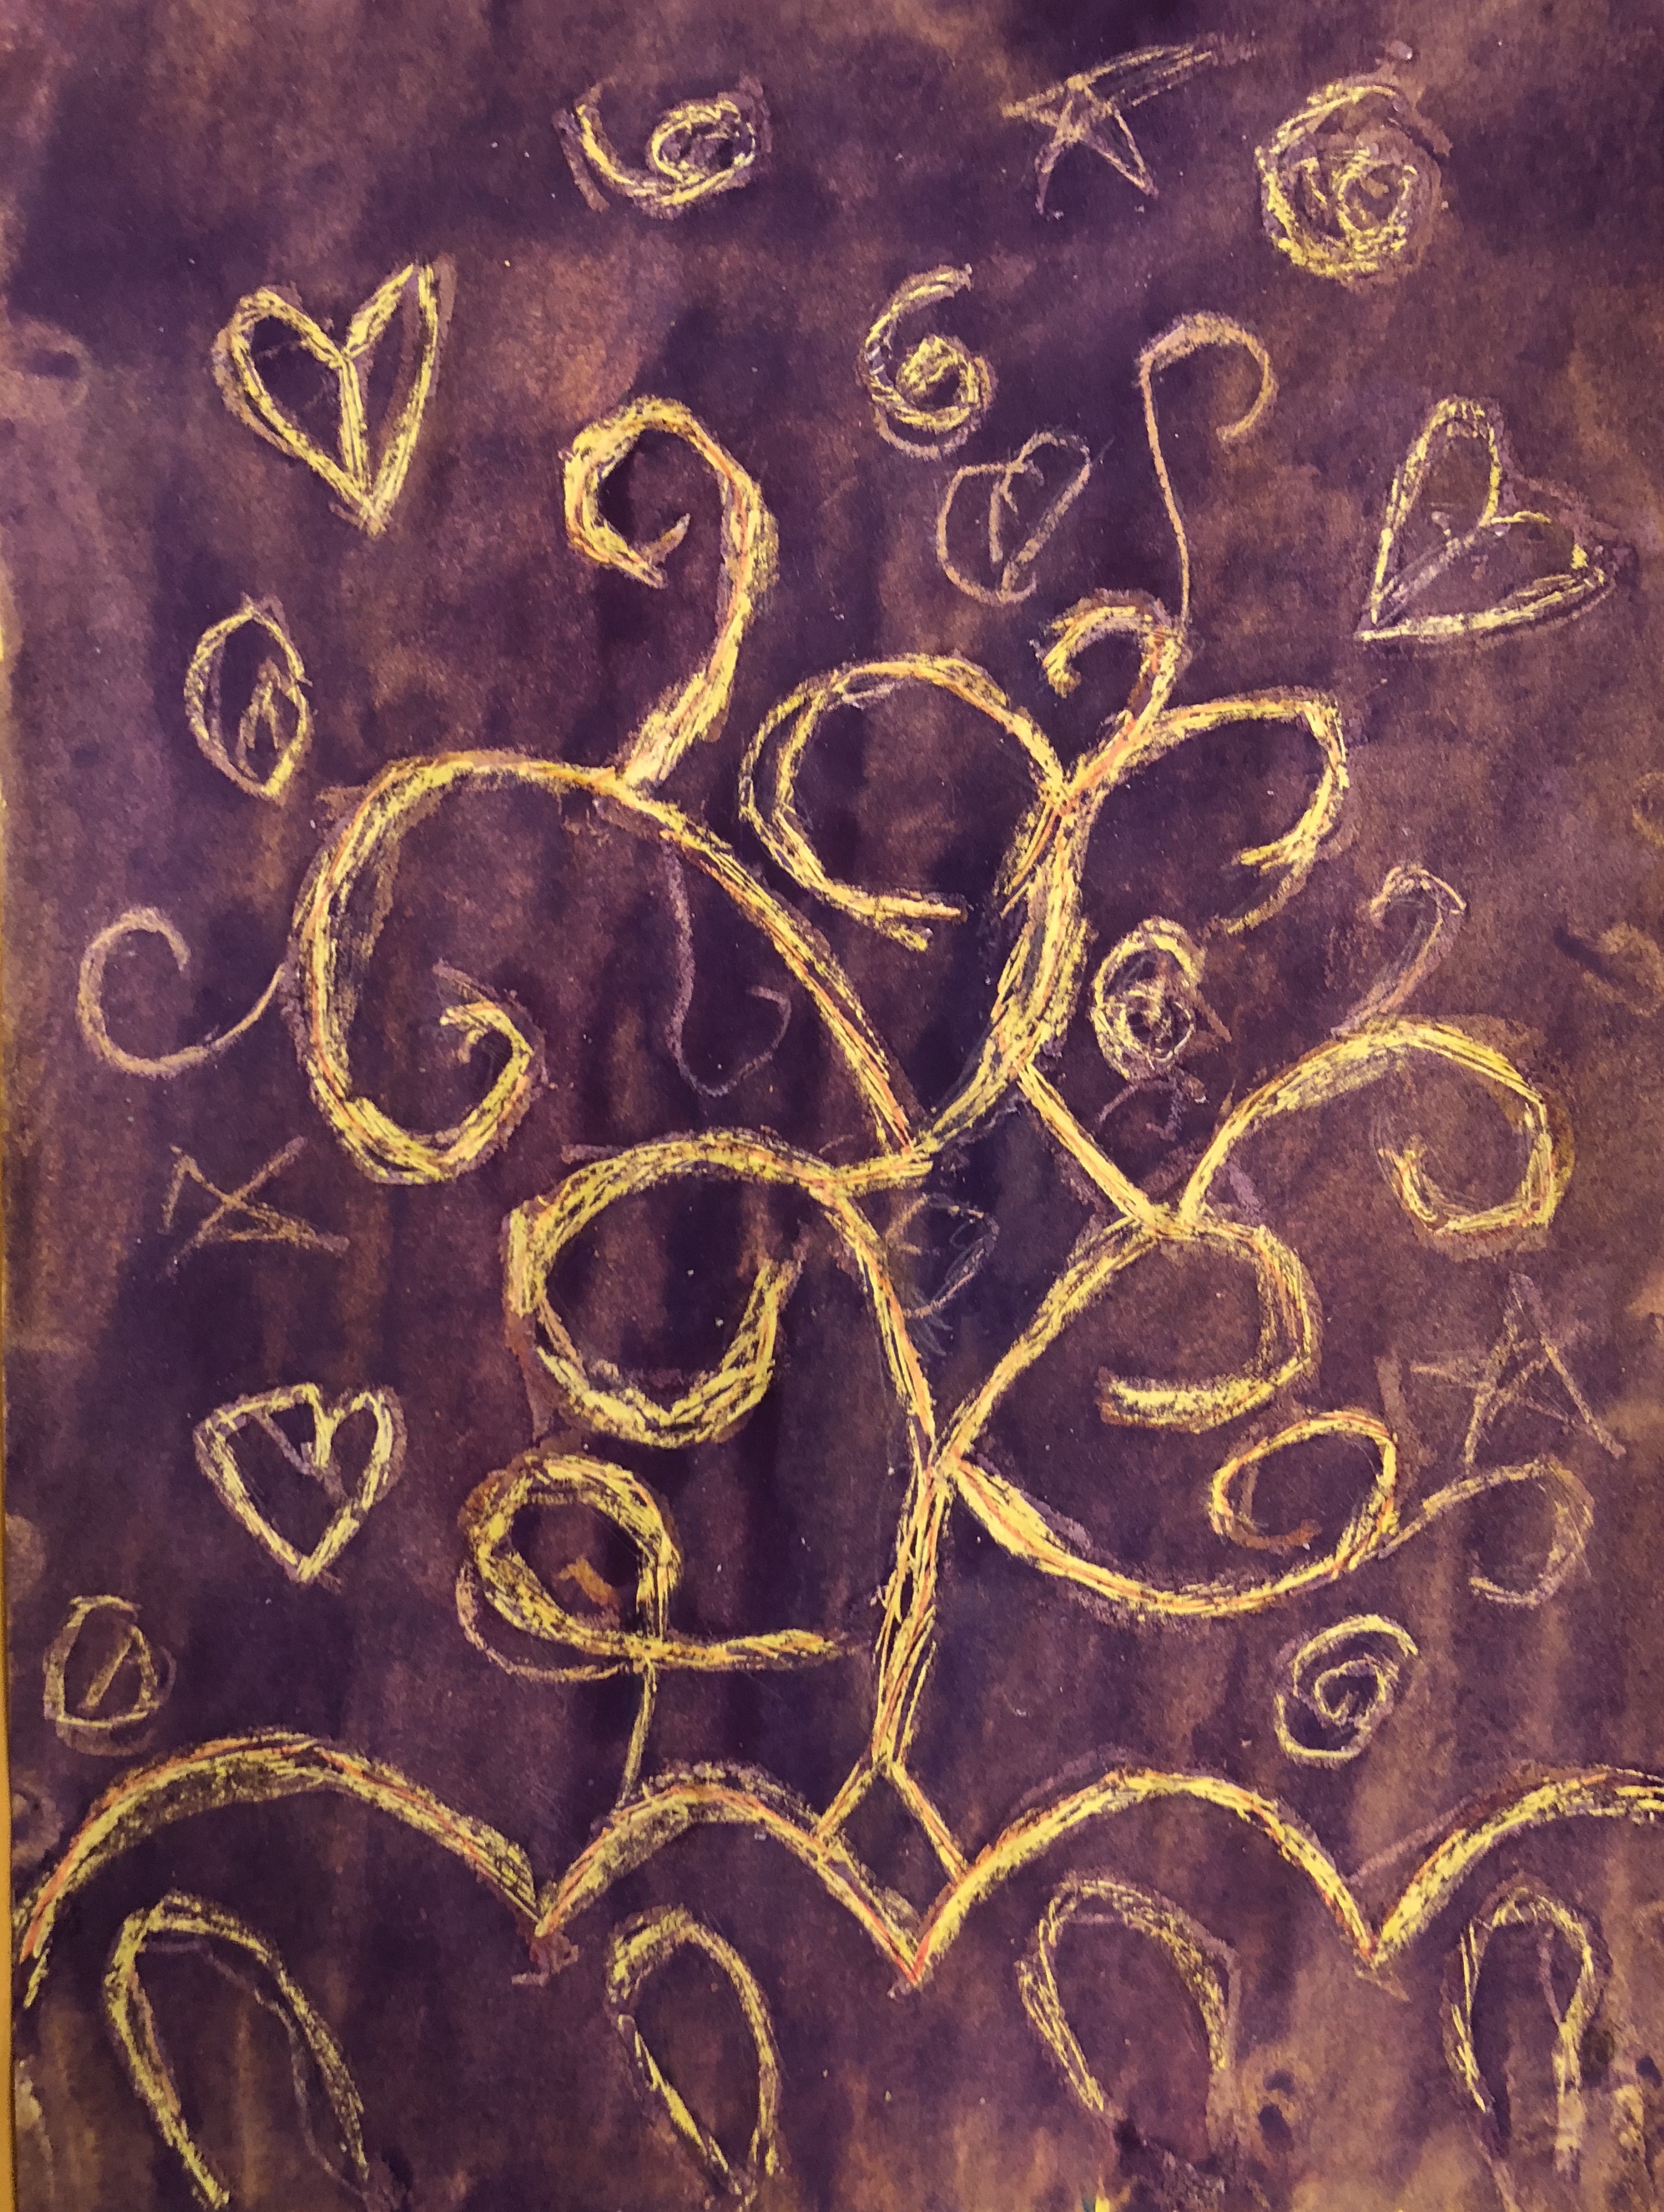 abstract drawing of a golden tree surrounded by hearts and stars